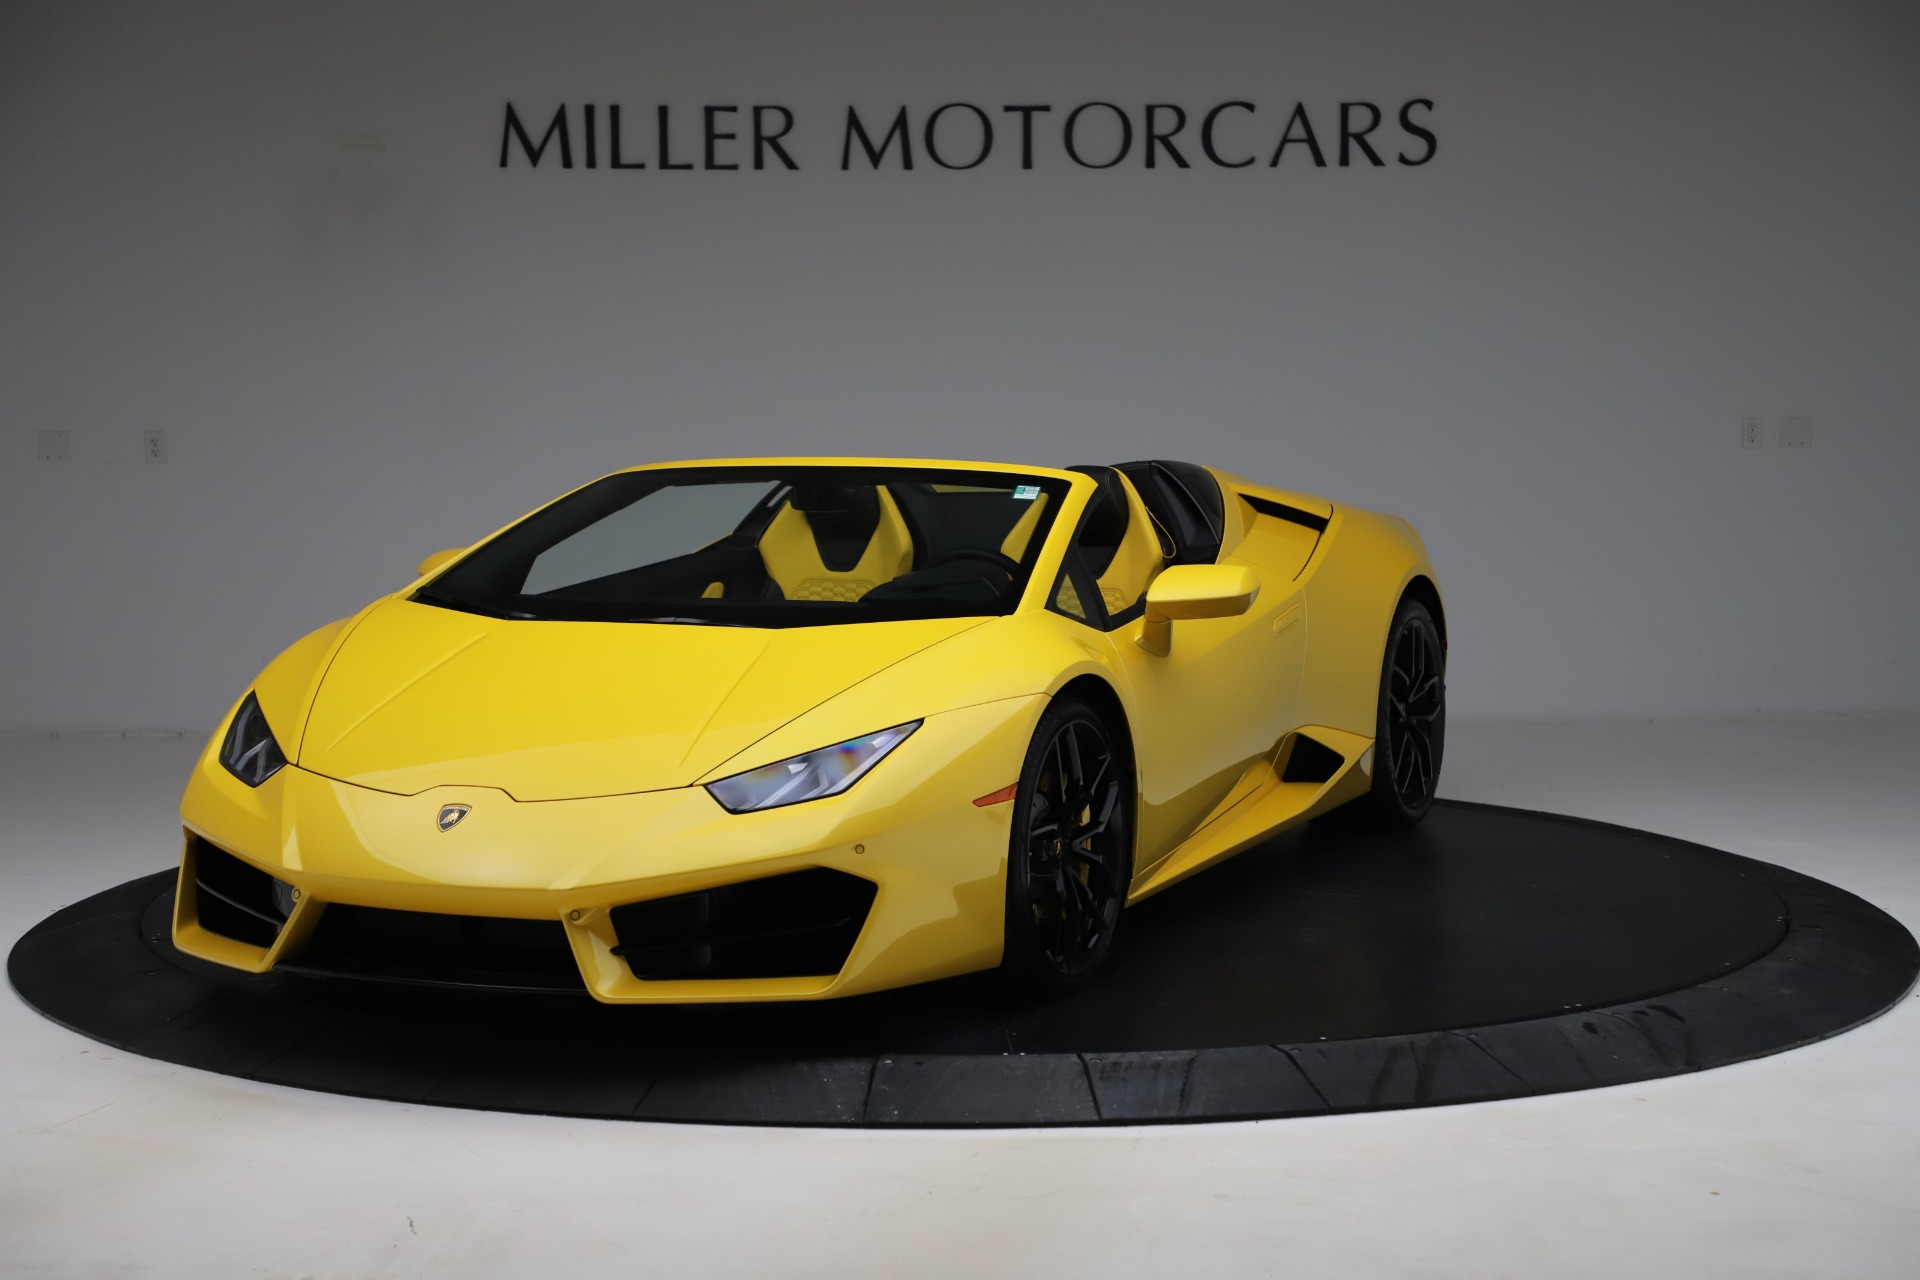 Used 2018 Lamborghini Huracan LP 580-2 Spyder for sale Sold at Aston Martin of Greenwich in Greenwich CT 06830 1